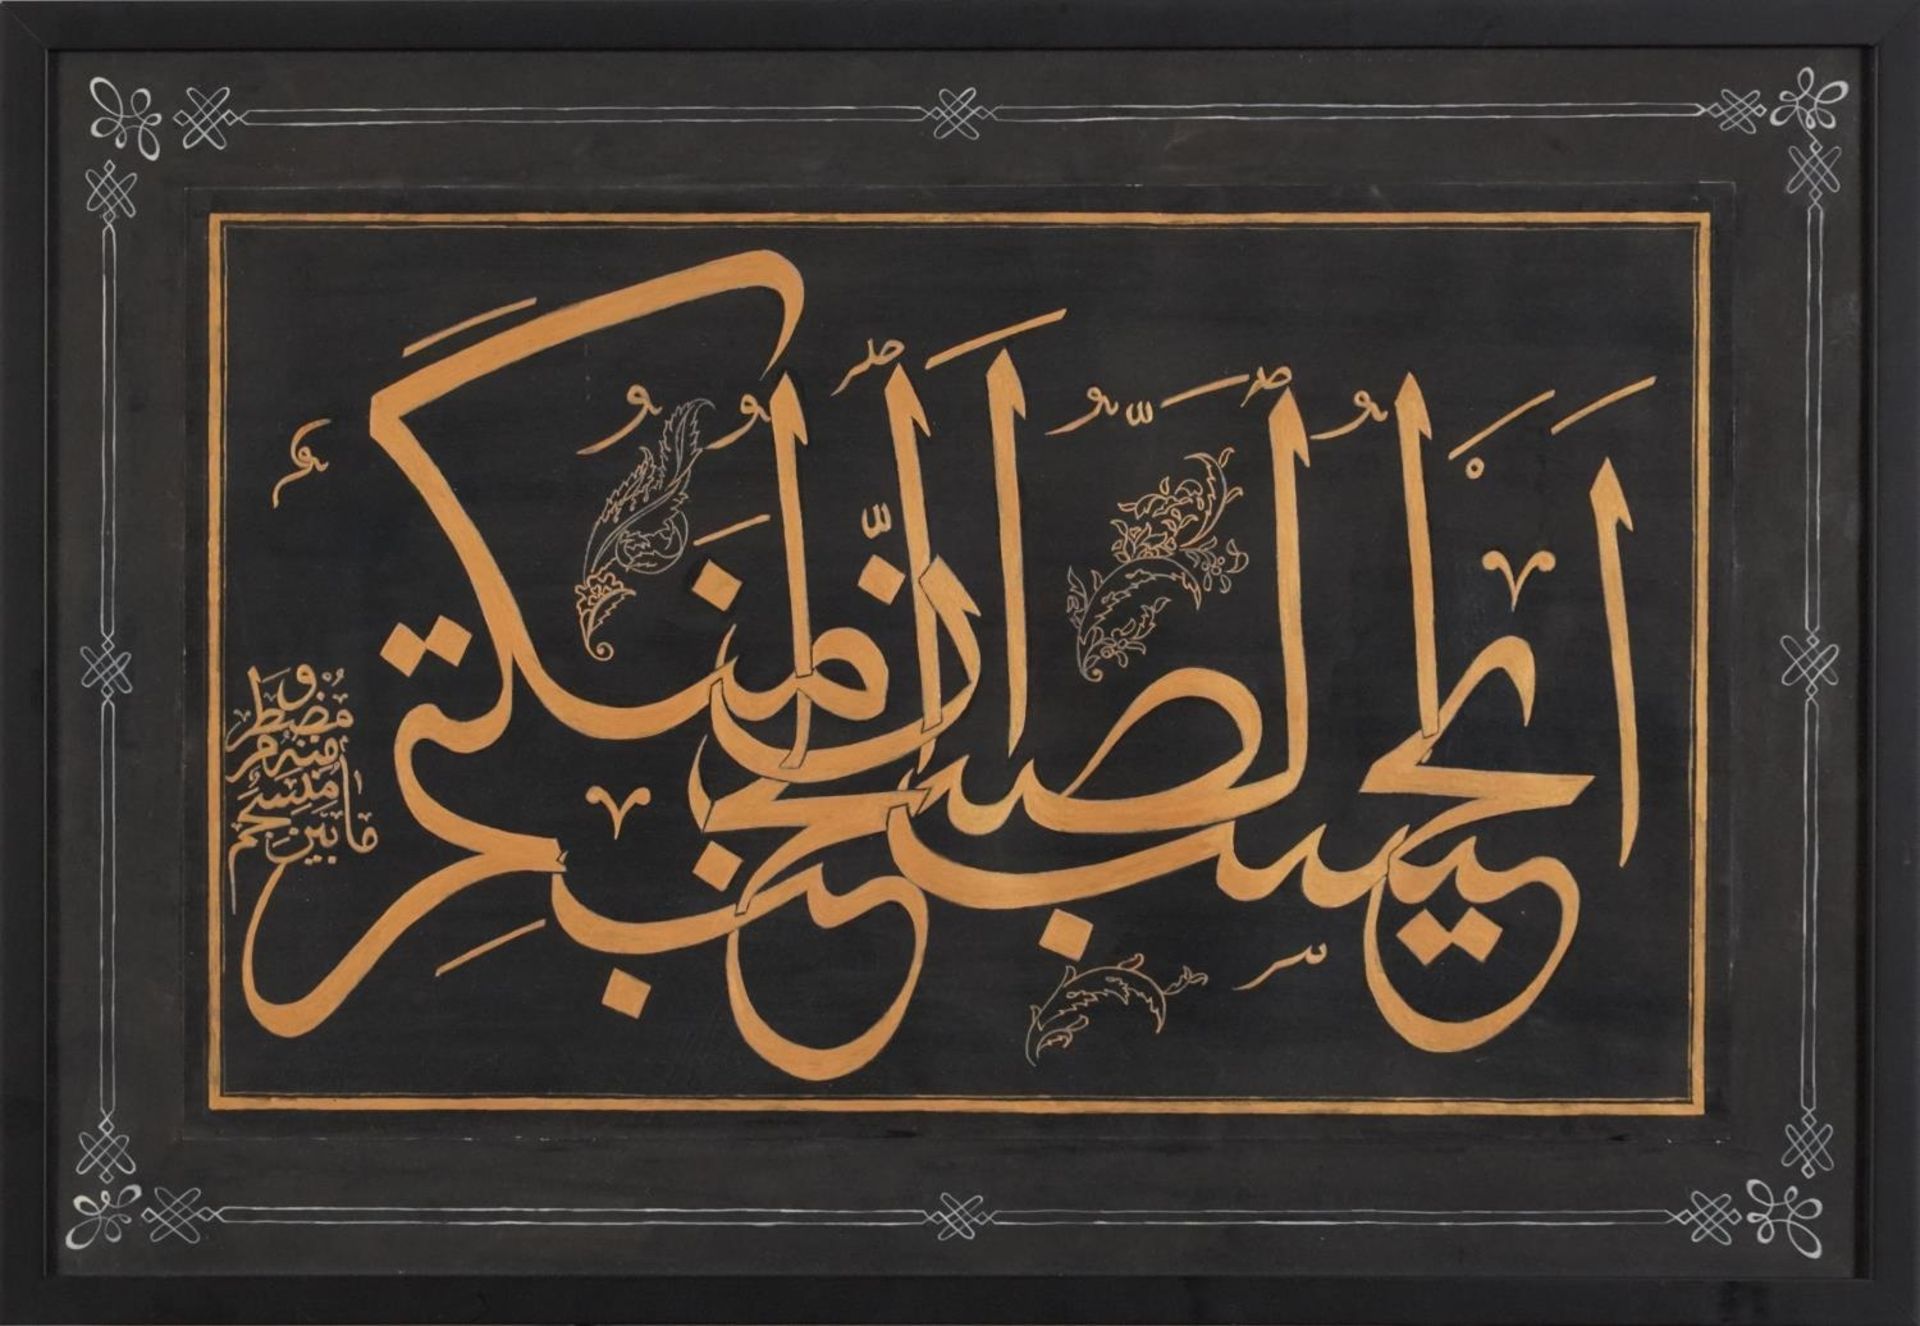 Calligraphy, Turkish painting, framed and glazed, 61cm x 41cm excluding the frame : For further - Image 2 of 3